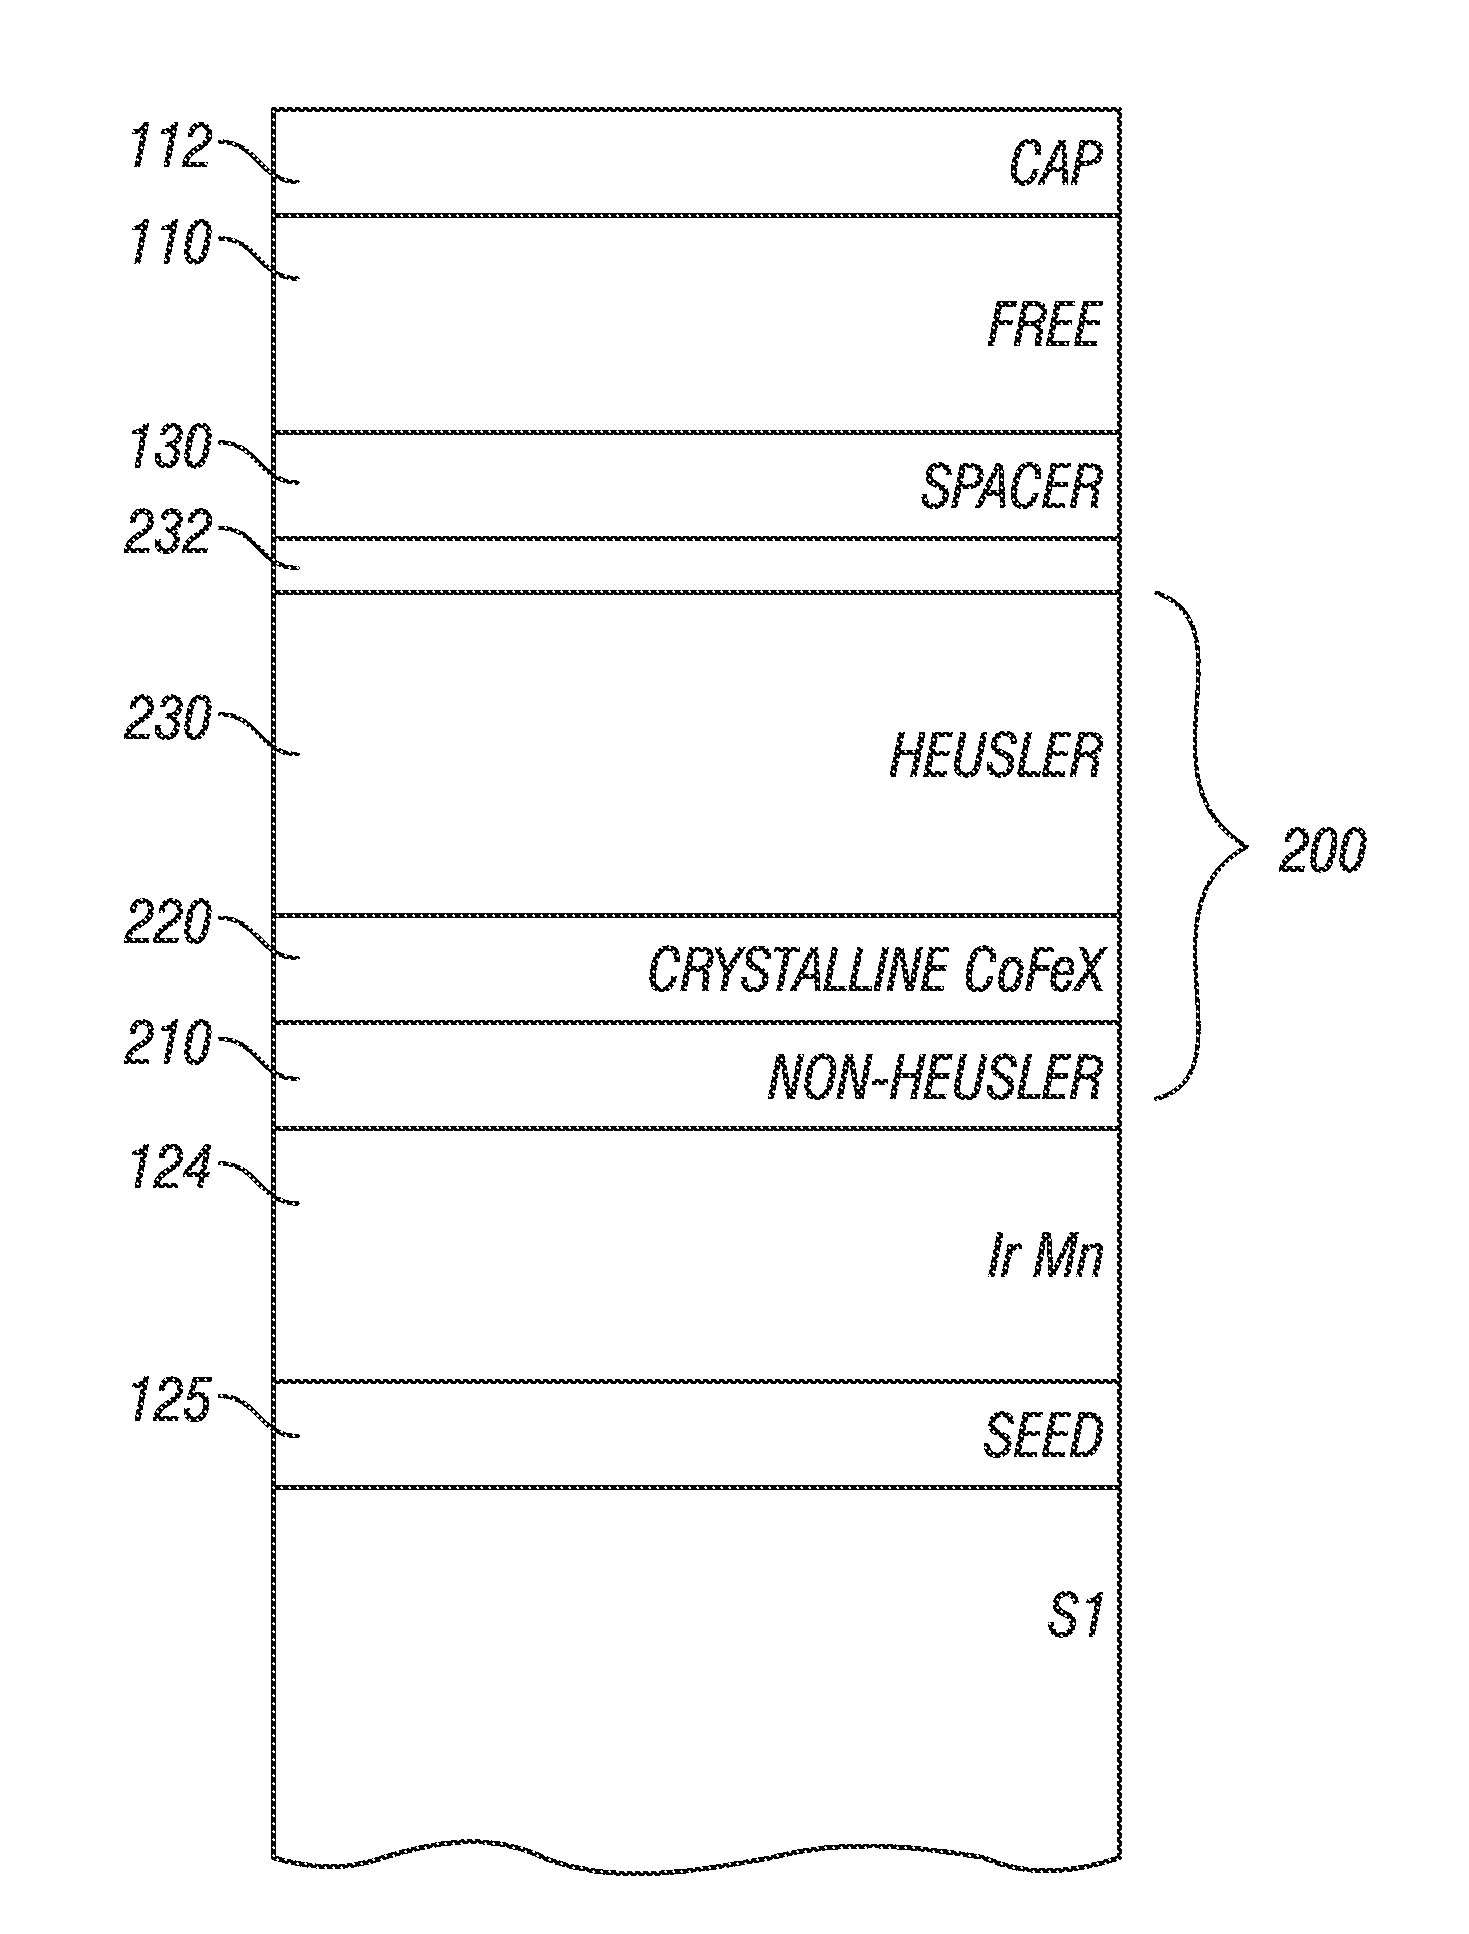 CURRENT-PERPENDICULAR-TO-THE-PLANE (CPP) MAGNETORESISTIVE SENSOR WITH MULTILAYER REFERENCE LAYER INCLUDING A CRYSTALLINE CoFeX LAYER AND A HEUSLER ALLOY LAYER